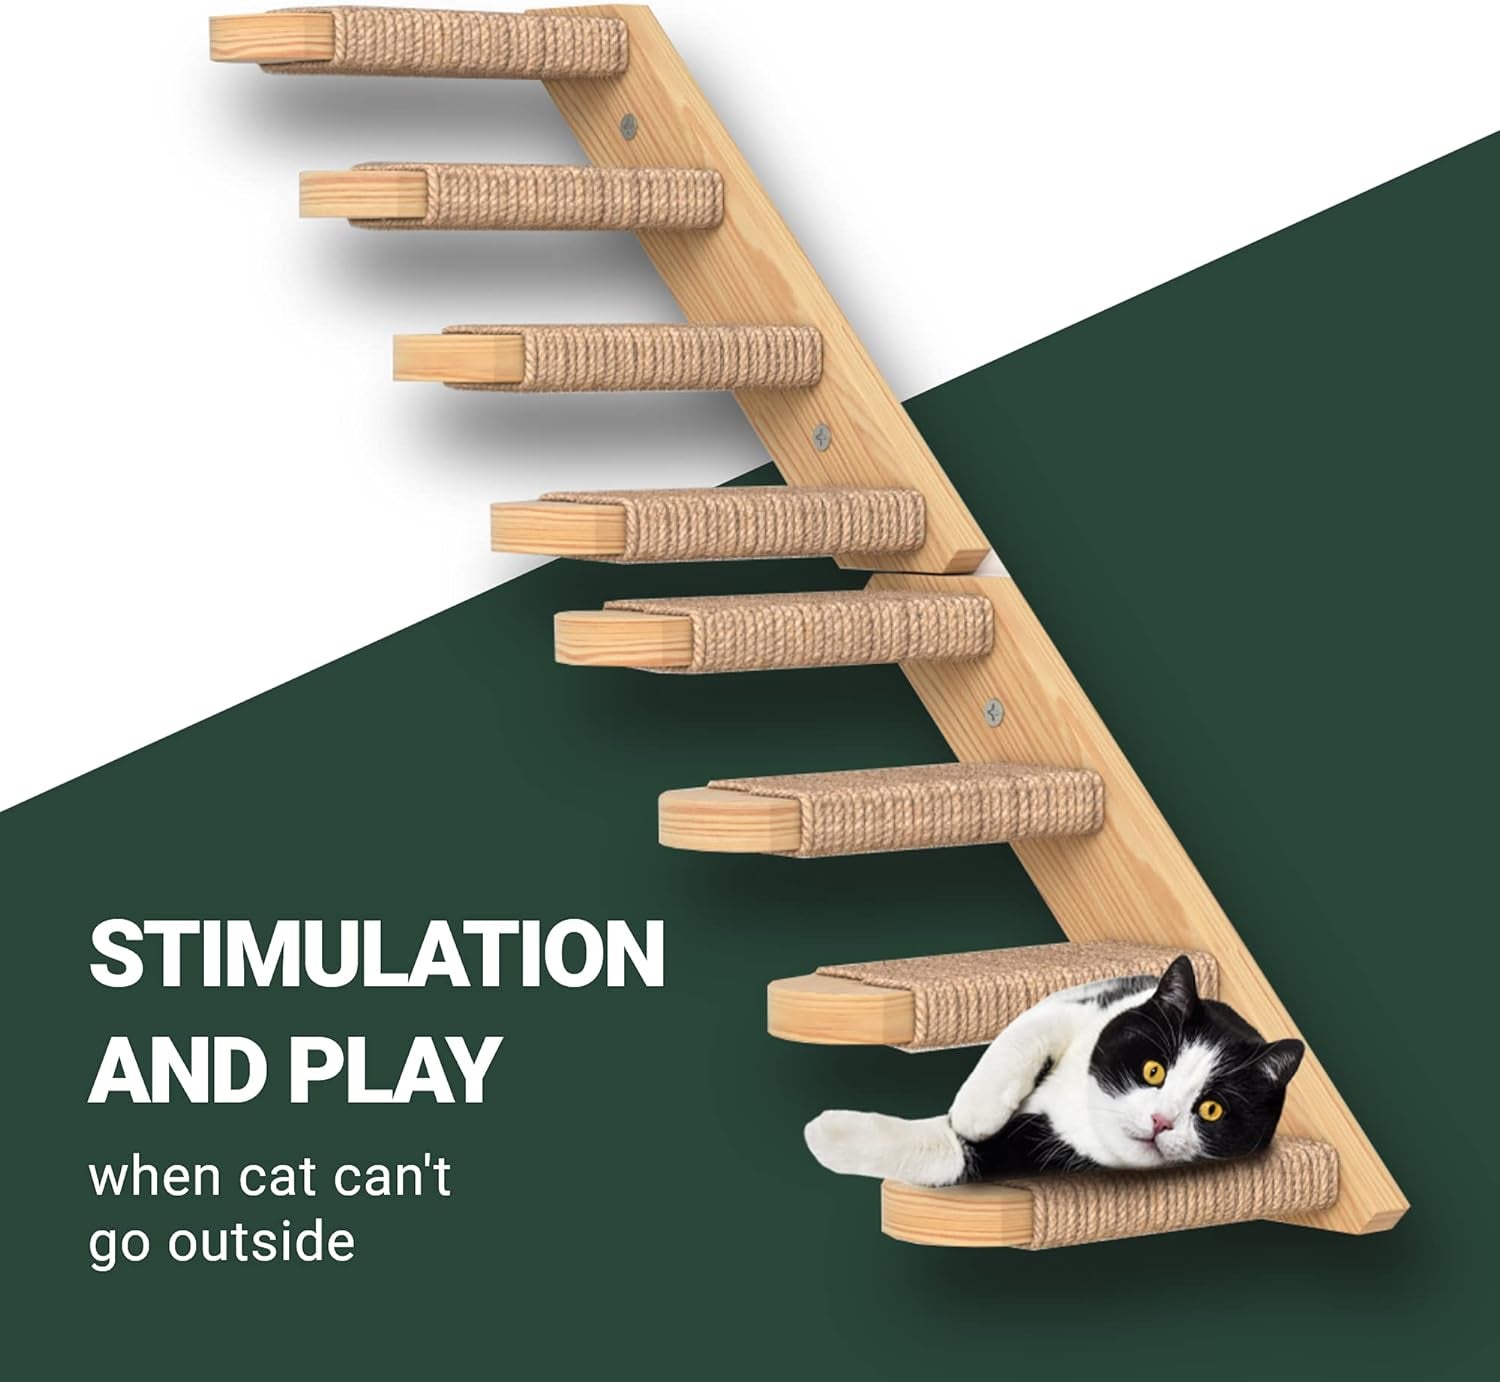 Cat Wall Steps - Solid Rubber Wood Cat Stairs Great for Scratching and Climbing - Easy to Install Wall Mounted Cat Shelves for Playful Cats (Wood, Right-Left)